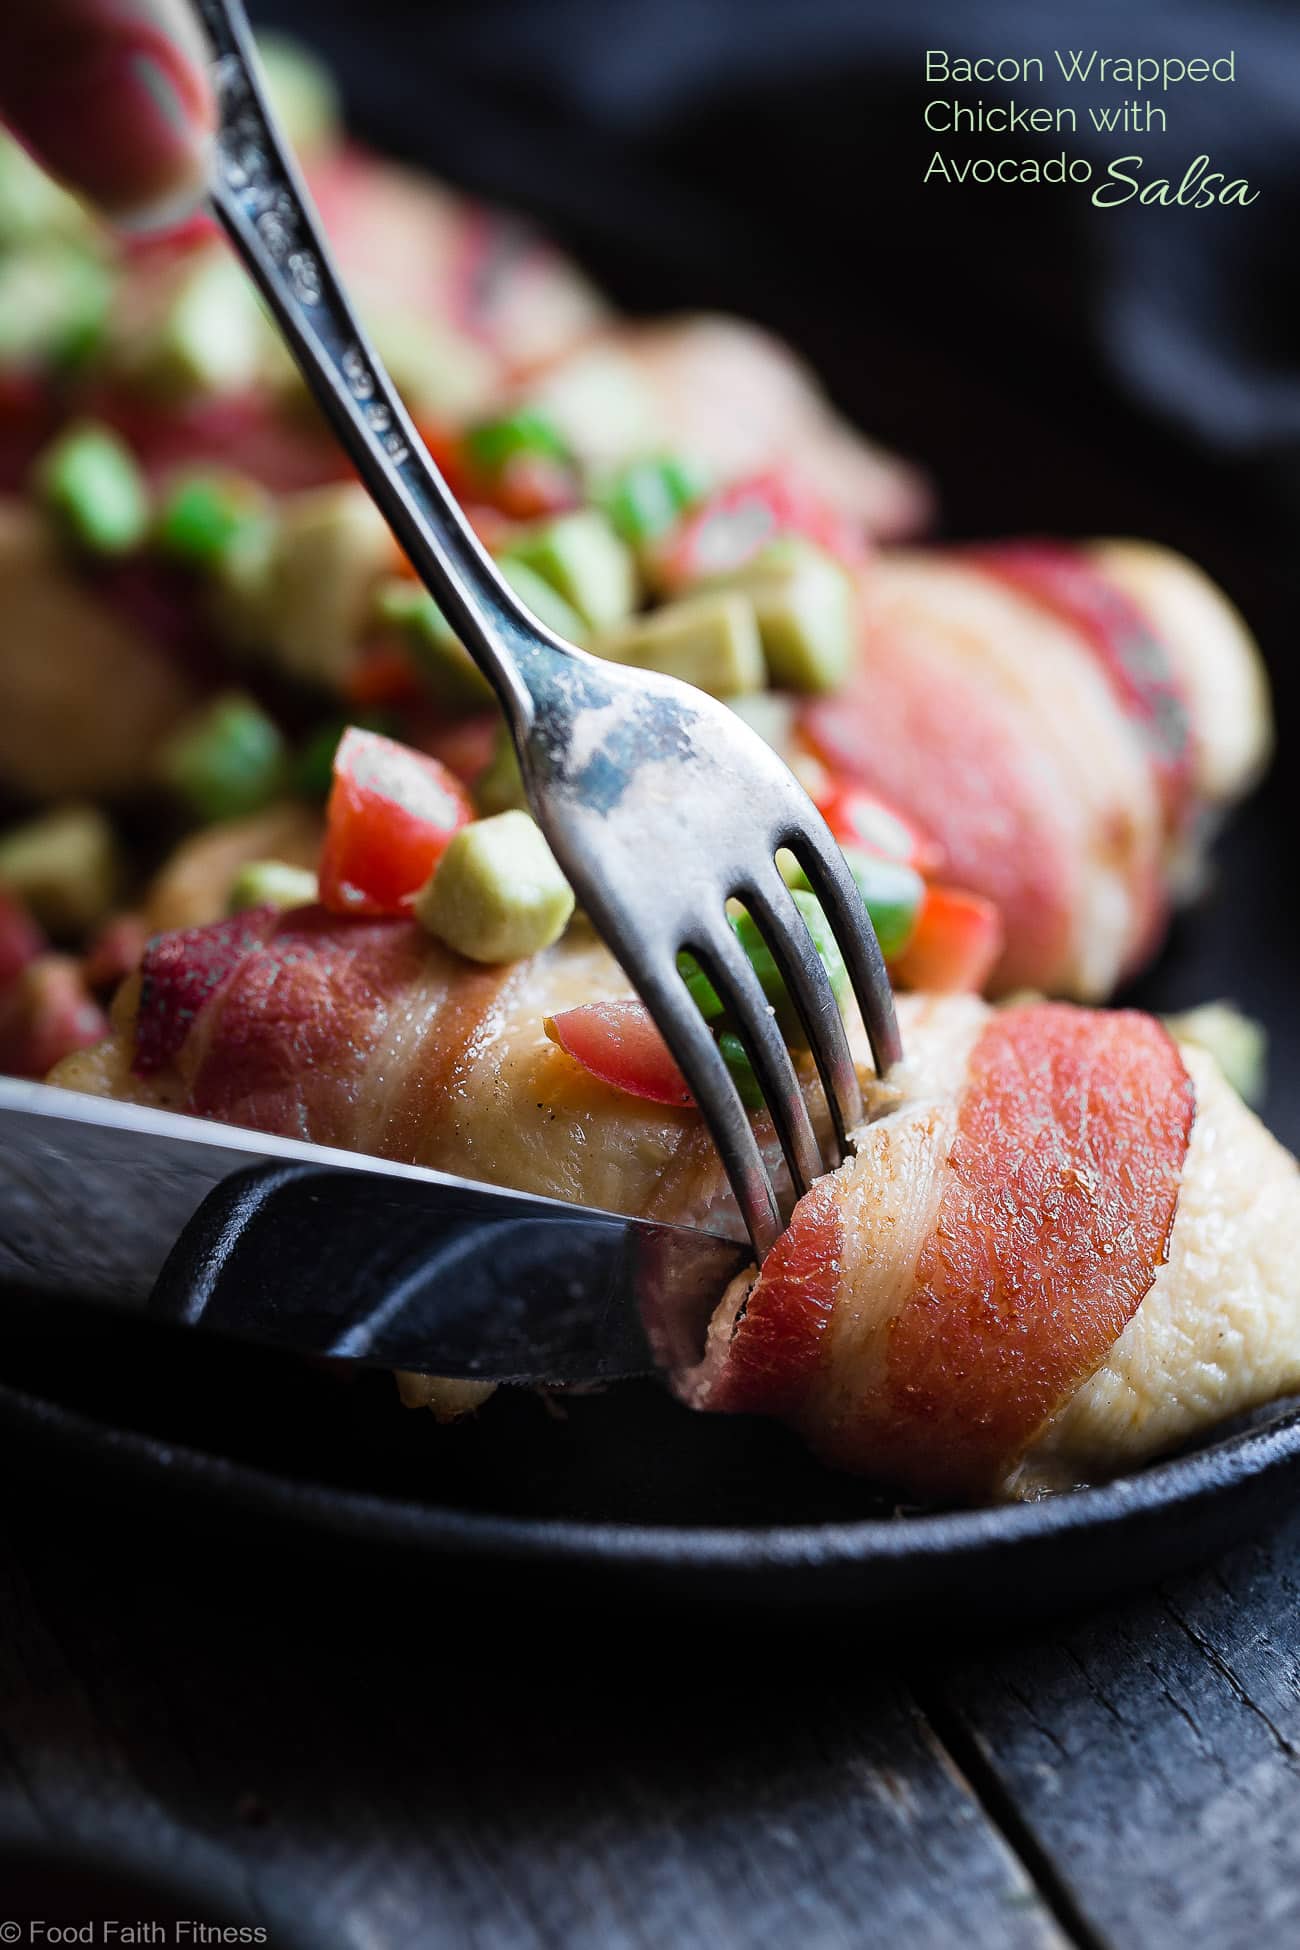 Whole30 Oven Baked Bacon Wrapped Chicken Breast - with a CREAMY, addicting avocado salsa, this is one quick and easy, kid friendly dinner that's paleo, keto and whole30 compliant! | Foodfaithfitness.com | @FoodFaithFit